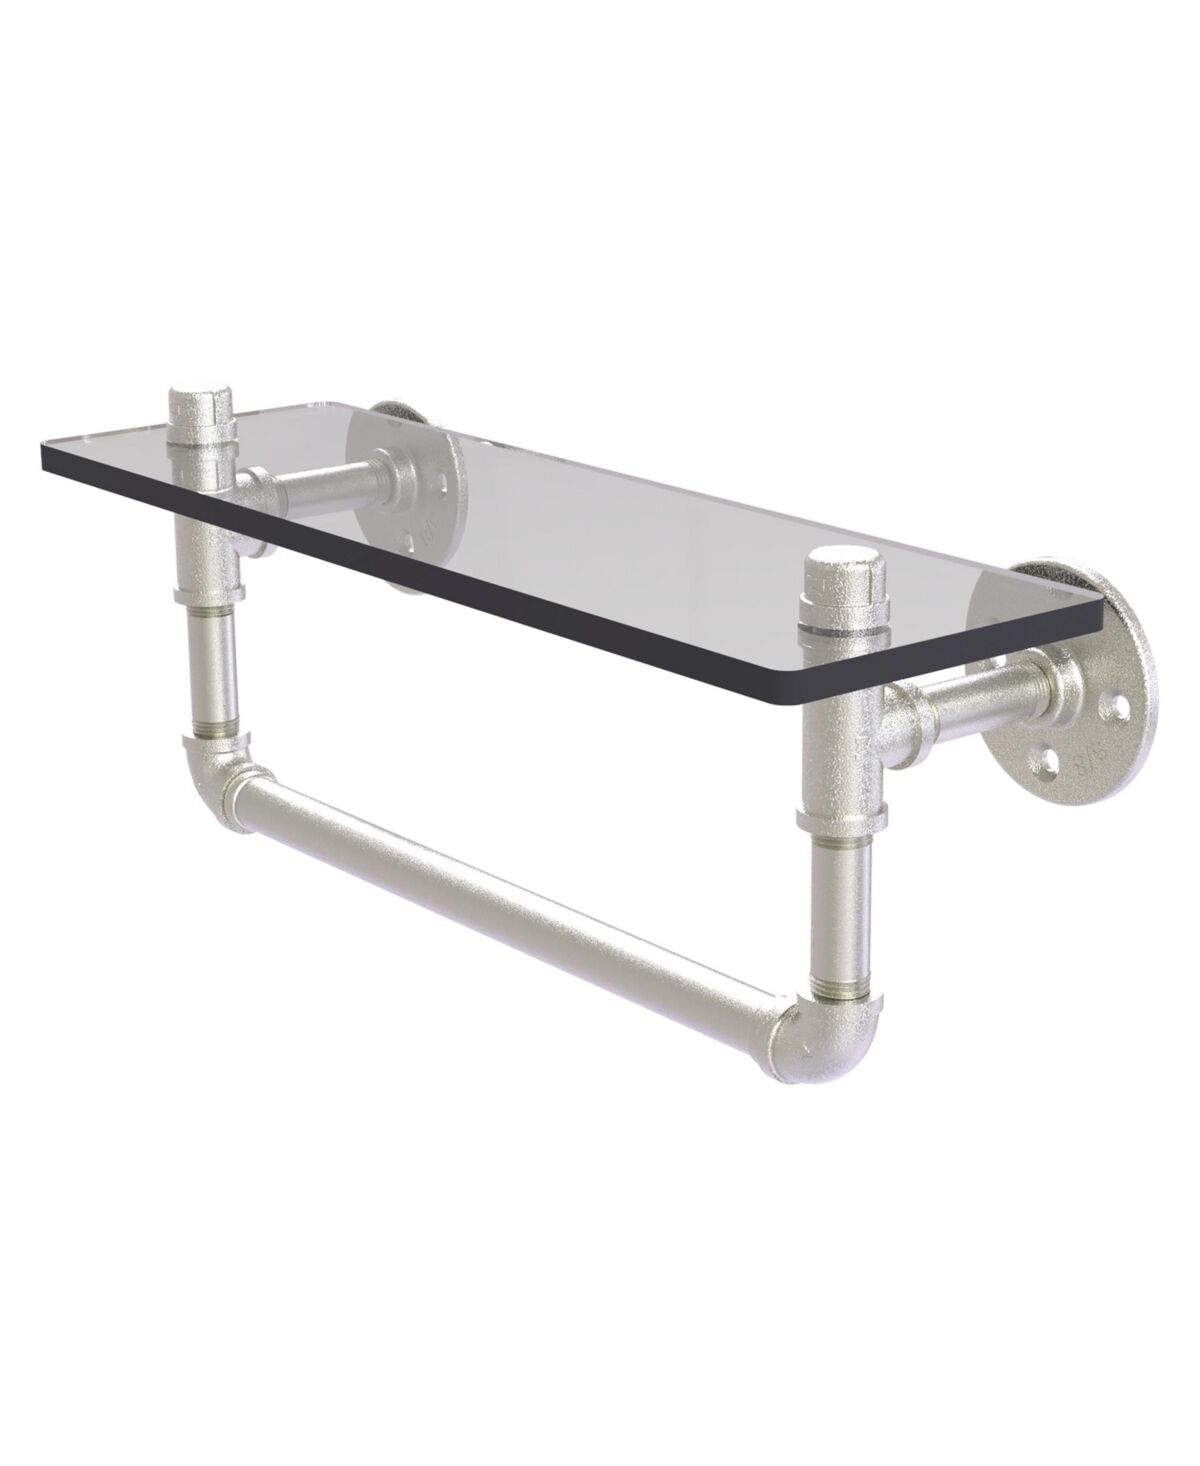 Allied Pipeline Collection 16 Inch Glass Shelf with Towel Bar - Satin nickel